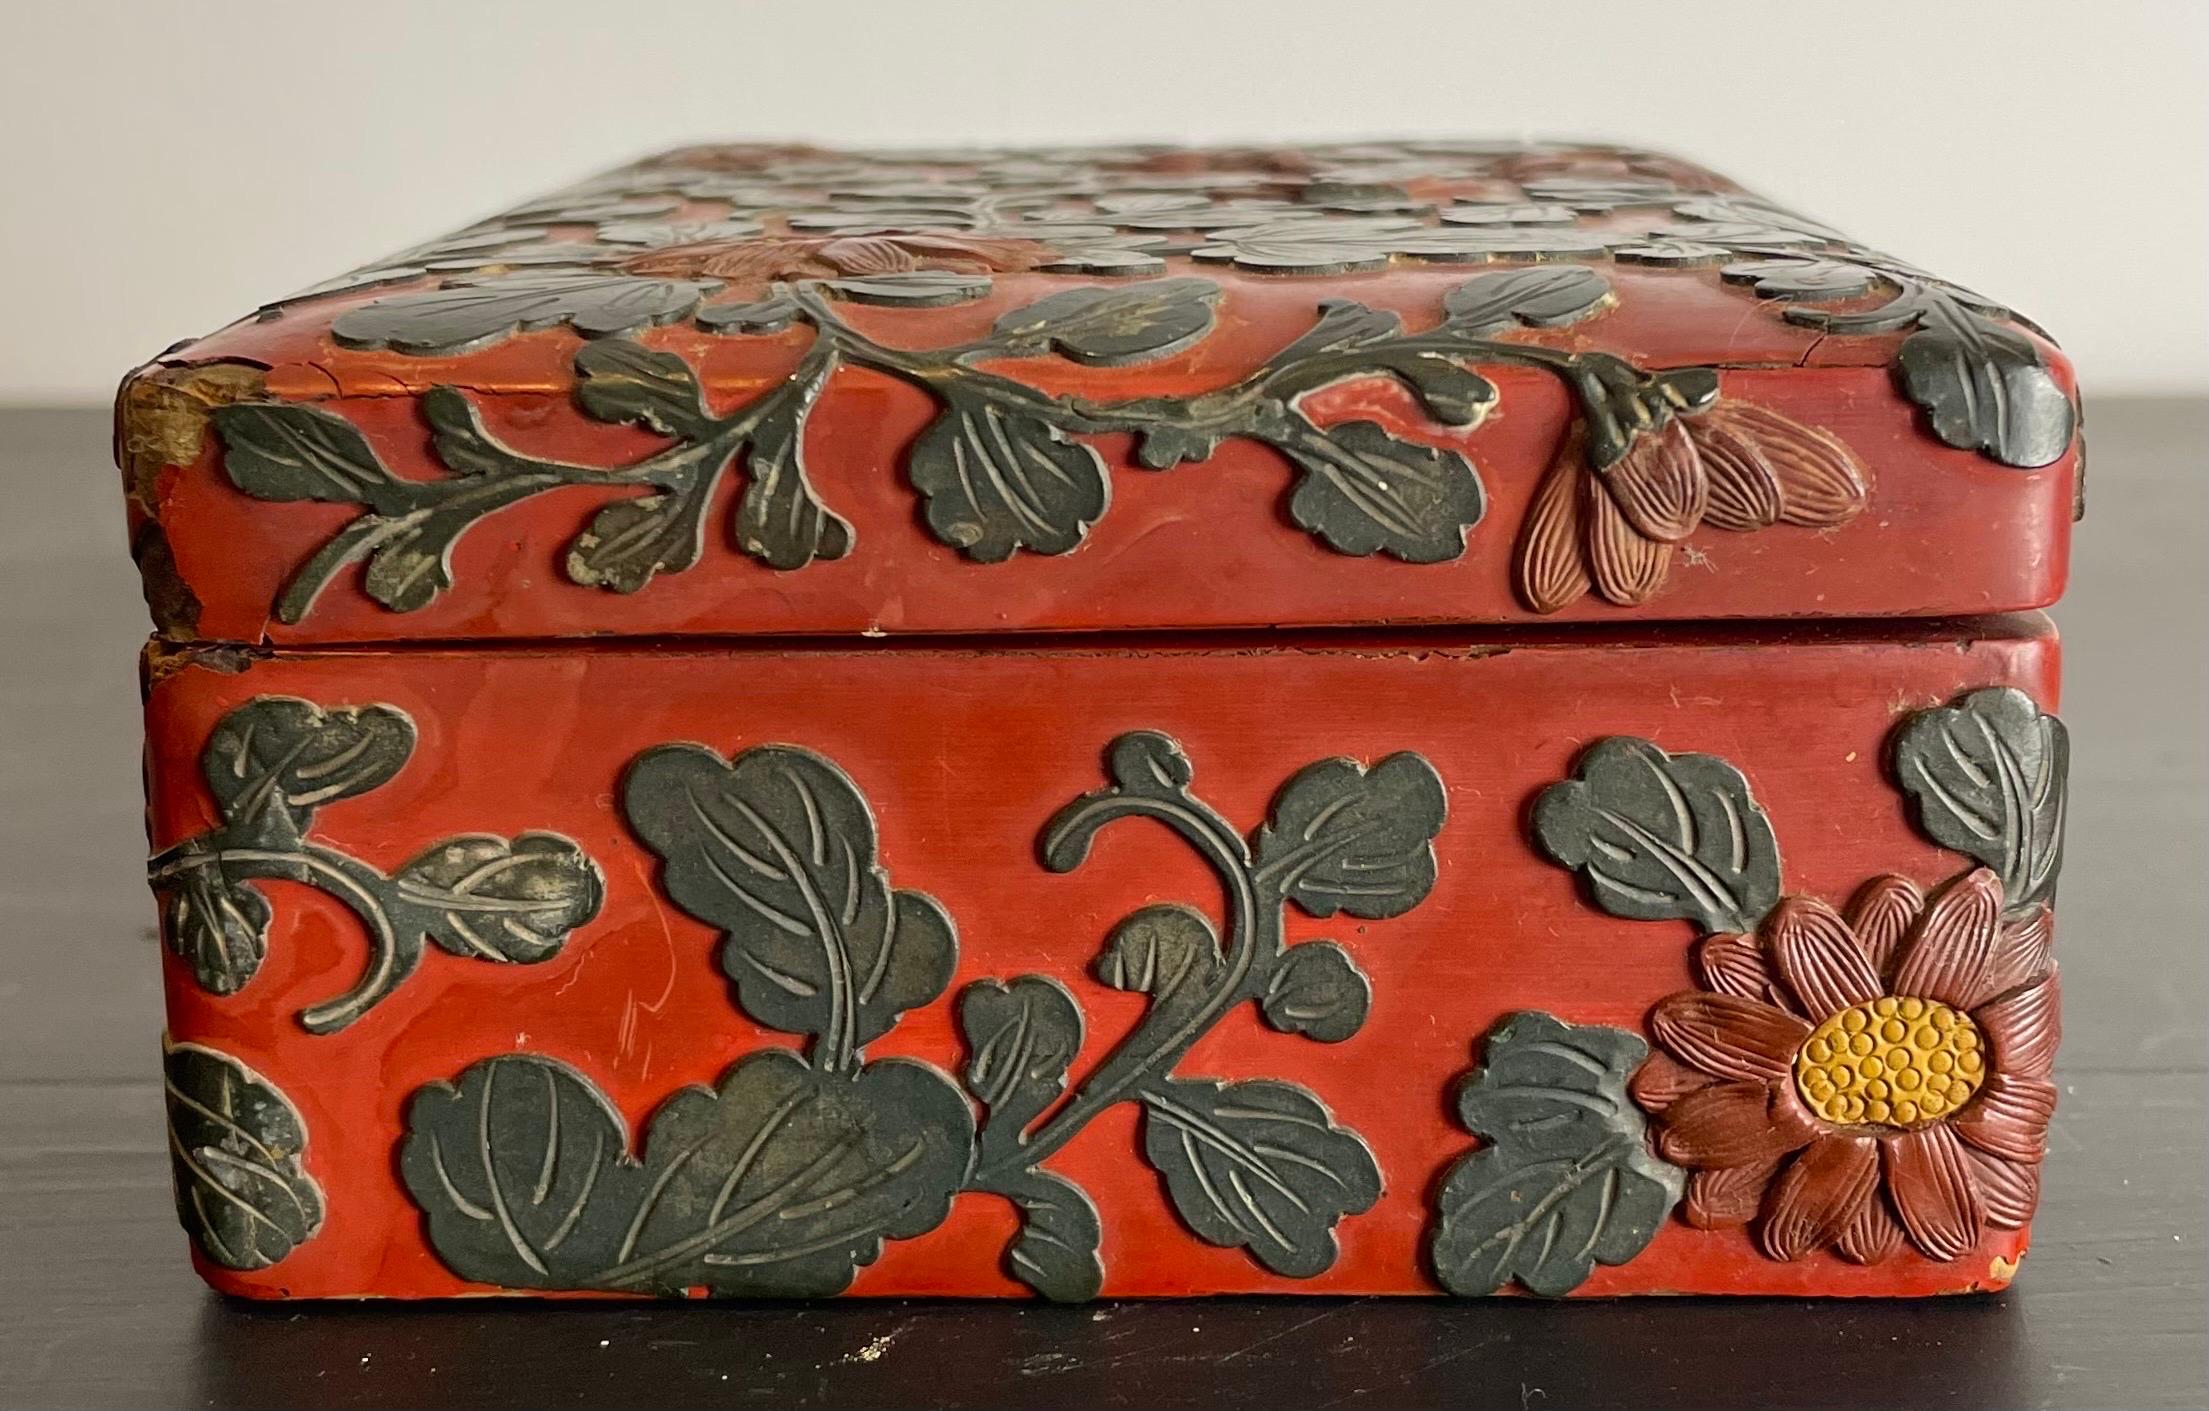 Beautiful little box lacquered with red and black Cinnabar forming a peony decoration. Cinnabar lacquer is an Asian technique that comes from cutting and superimposing different layers of colored lacquer. Very long and rigorous work explaining its